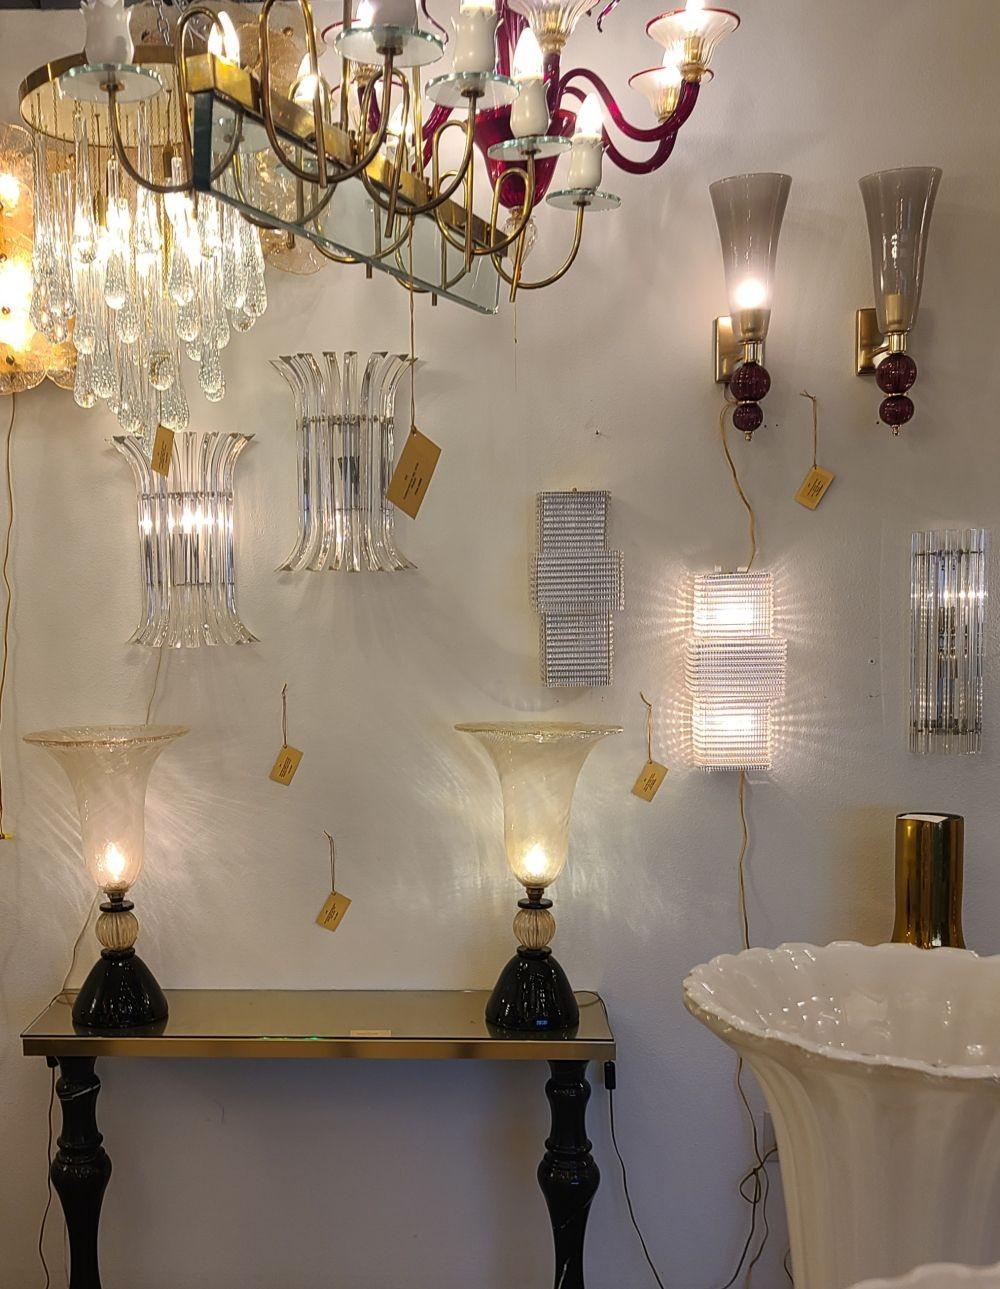 Pair of large Mid Century Modern clear Murano glass sconces, Italy 1970s.
The pair has a geometrical design, with brass fittings.
The clear Murano glass has a grid pattern, making it translucent.
Each sconce has 2 lights, and is rewired for the